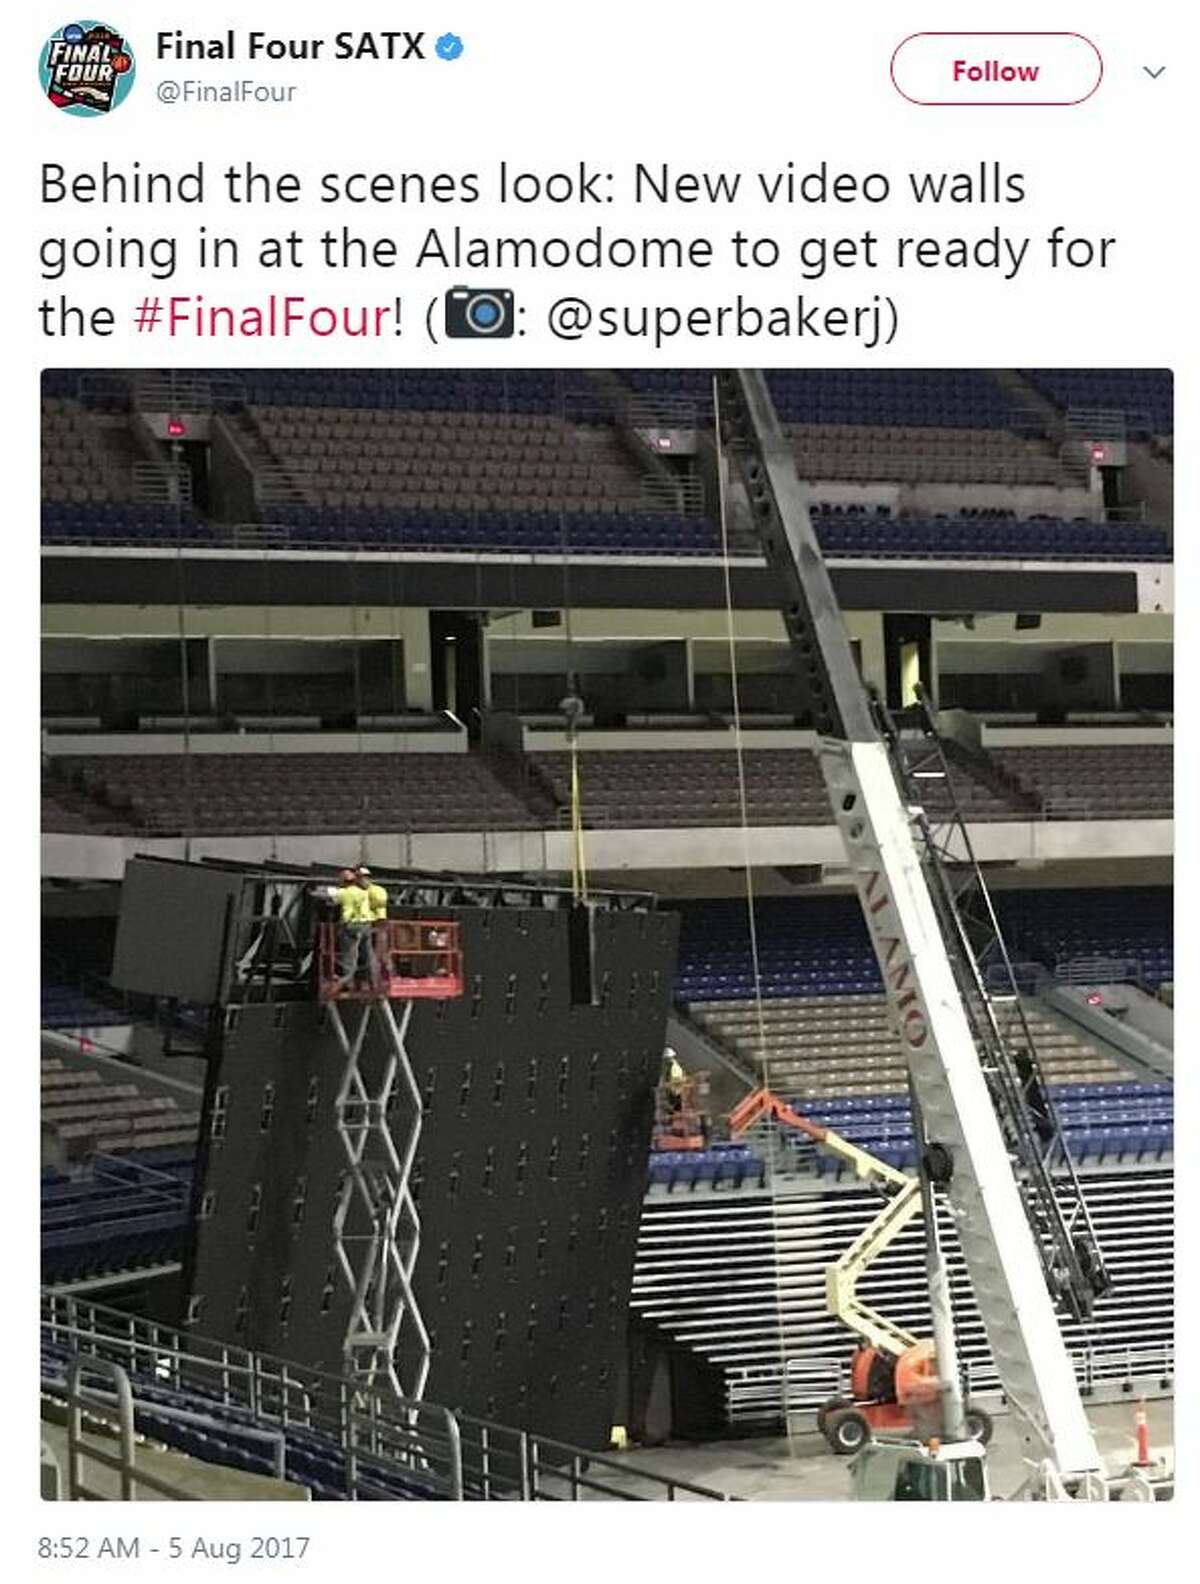 "Behind the scenes look: New video walls going in at the Alamodome to get ready for the #FinalFour! (@superbakerj)," @FinalFour.